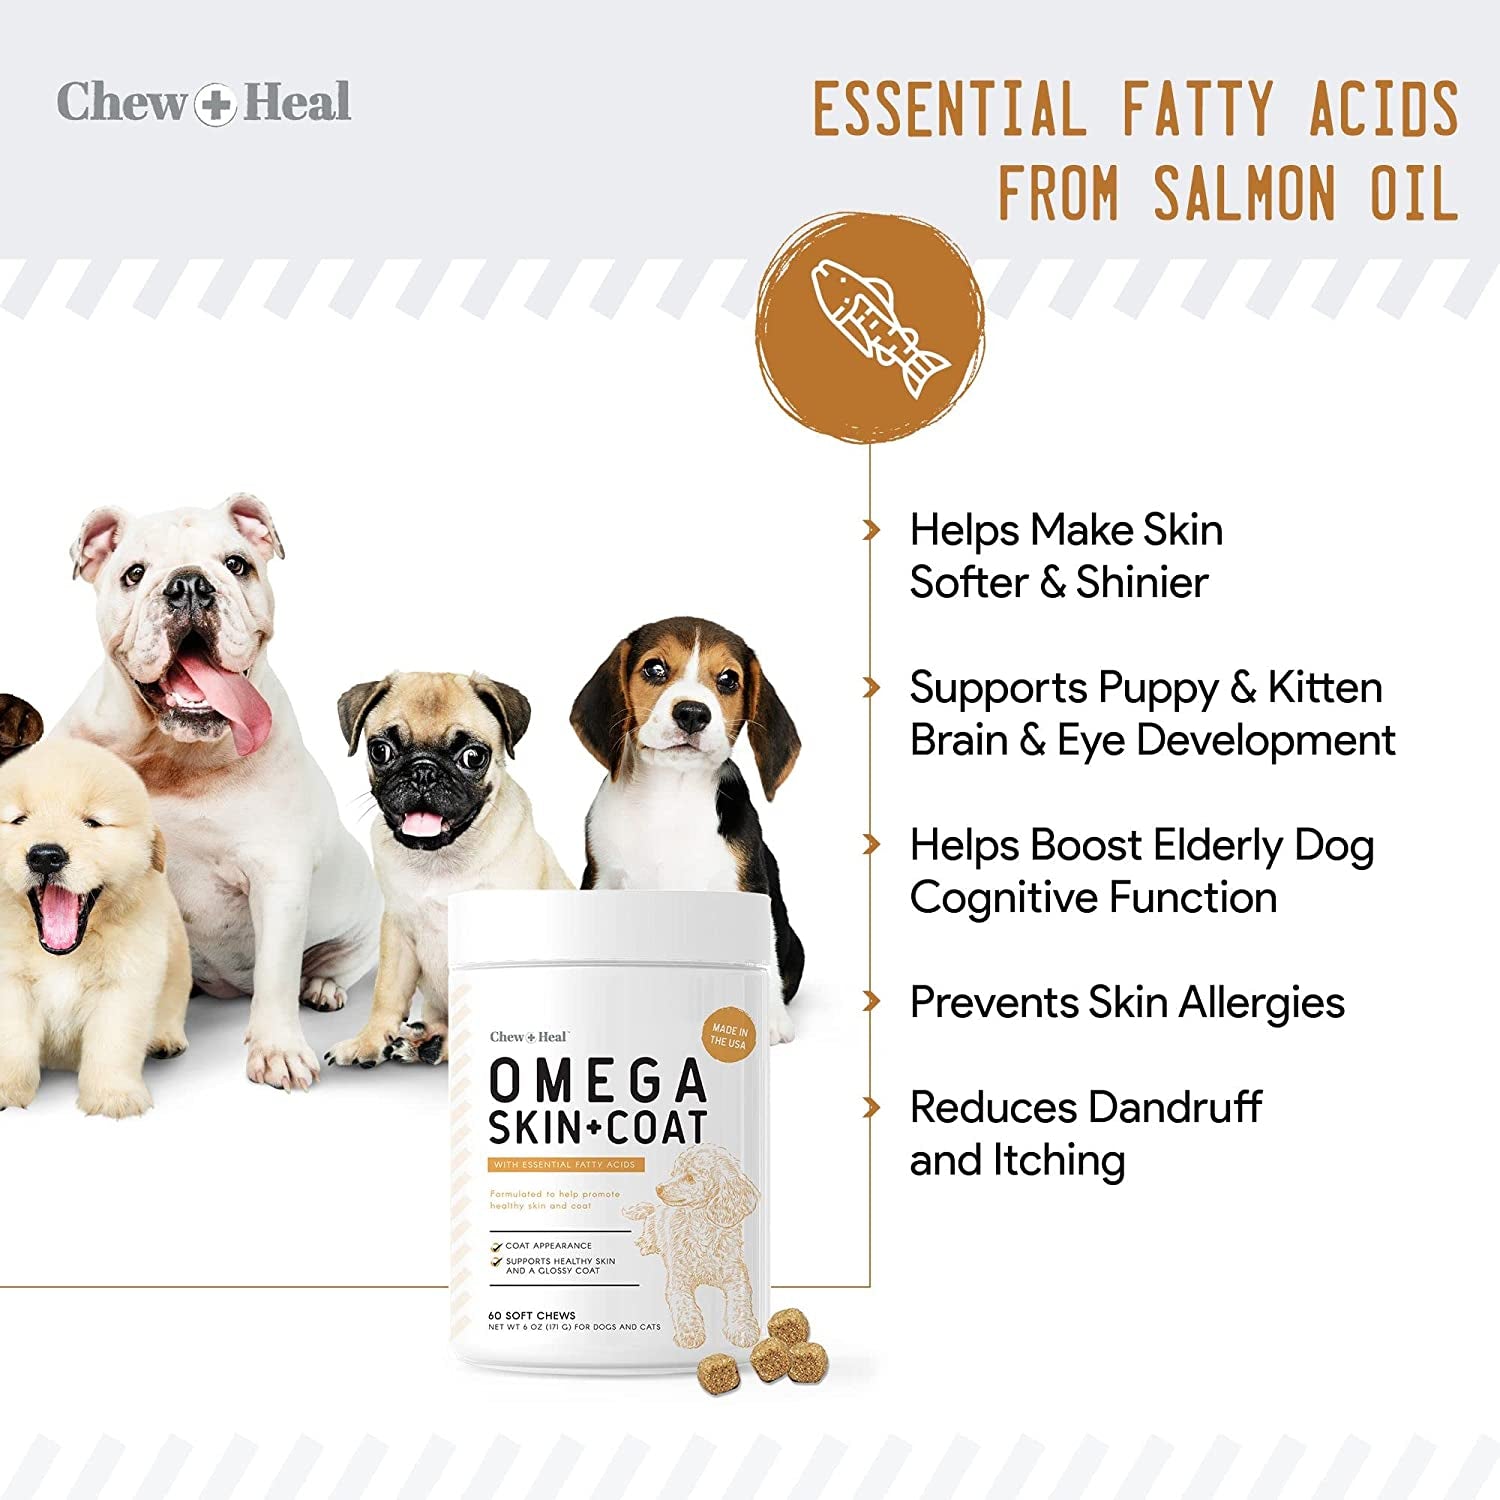 Chew + Heal Salmon Oil for Dogs - 60 Soft Chew Omega Treats for Skin and Coat - Fish Oil Blend of Essential Fatty Acids, Omega 3, 6, and 9, Vitamins, Antioxidants and Minerals - Made in USA